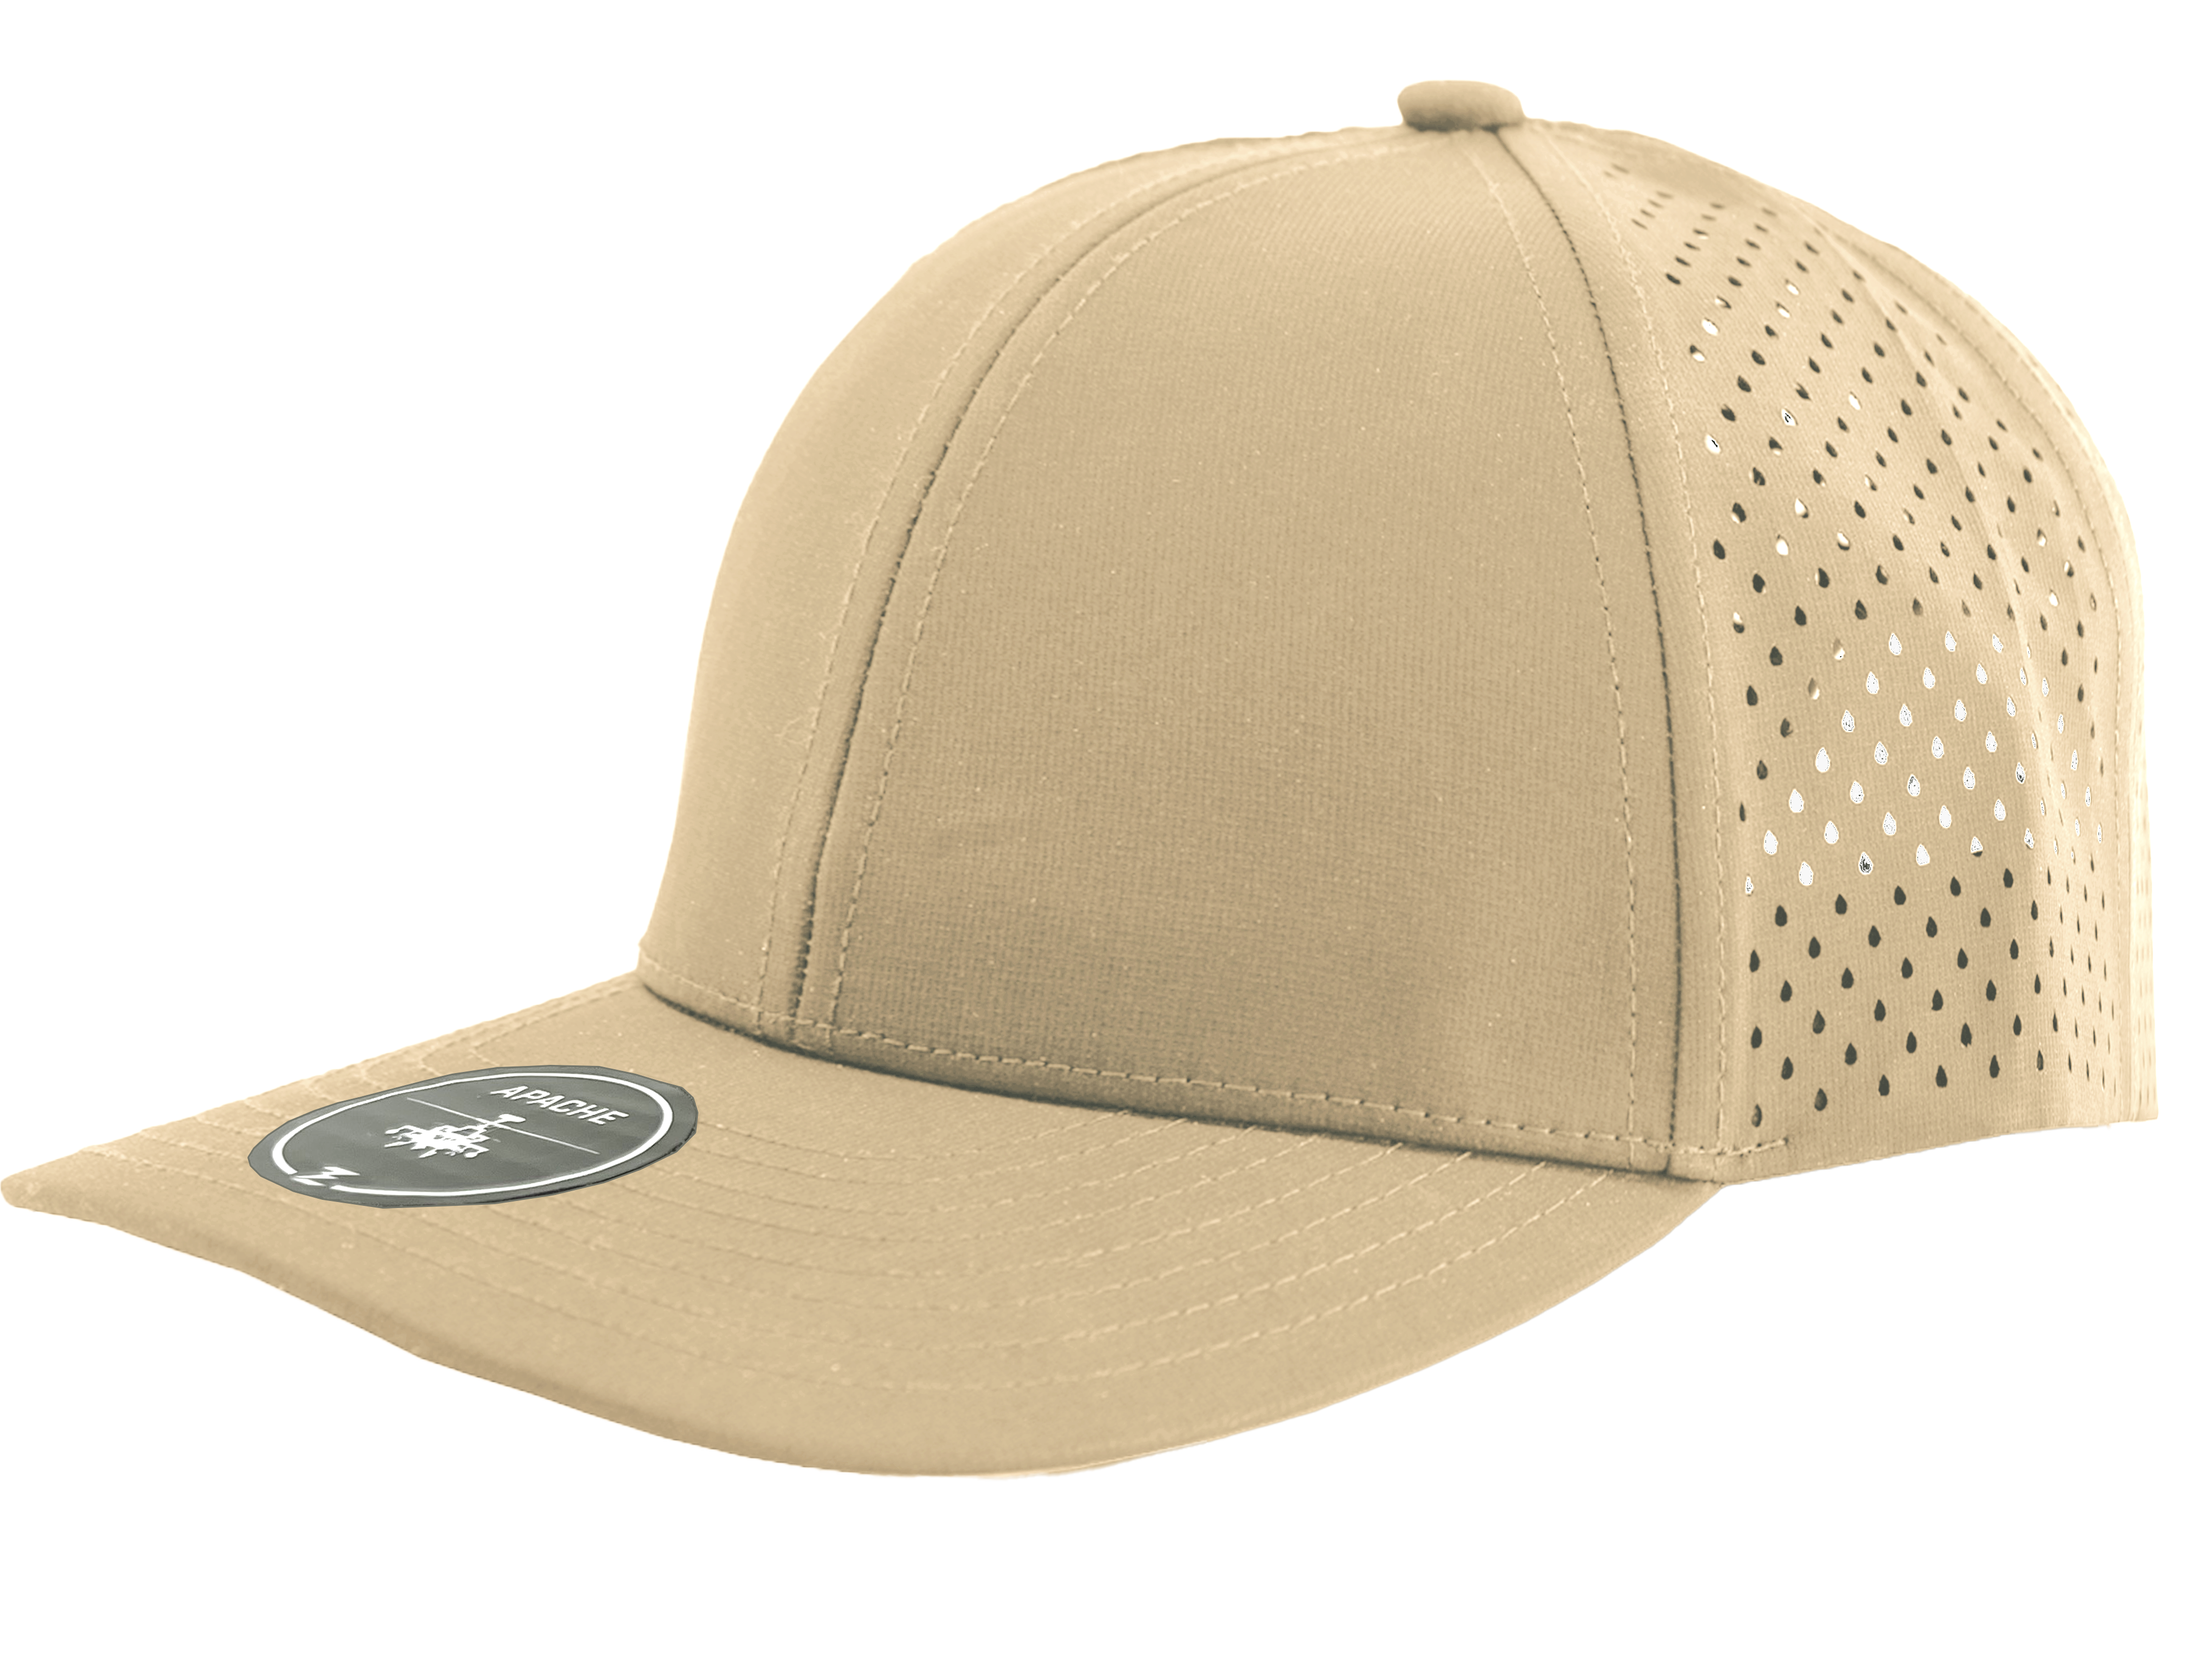 apache side view perforated khaki hat